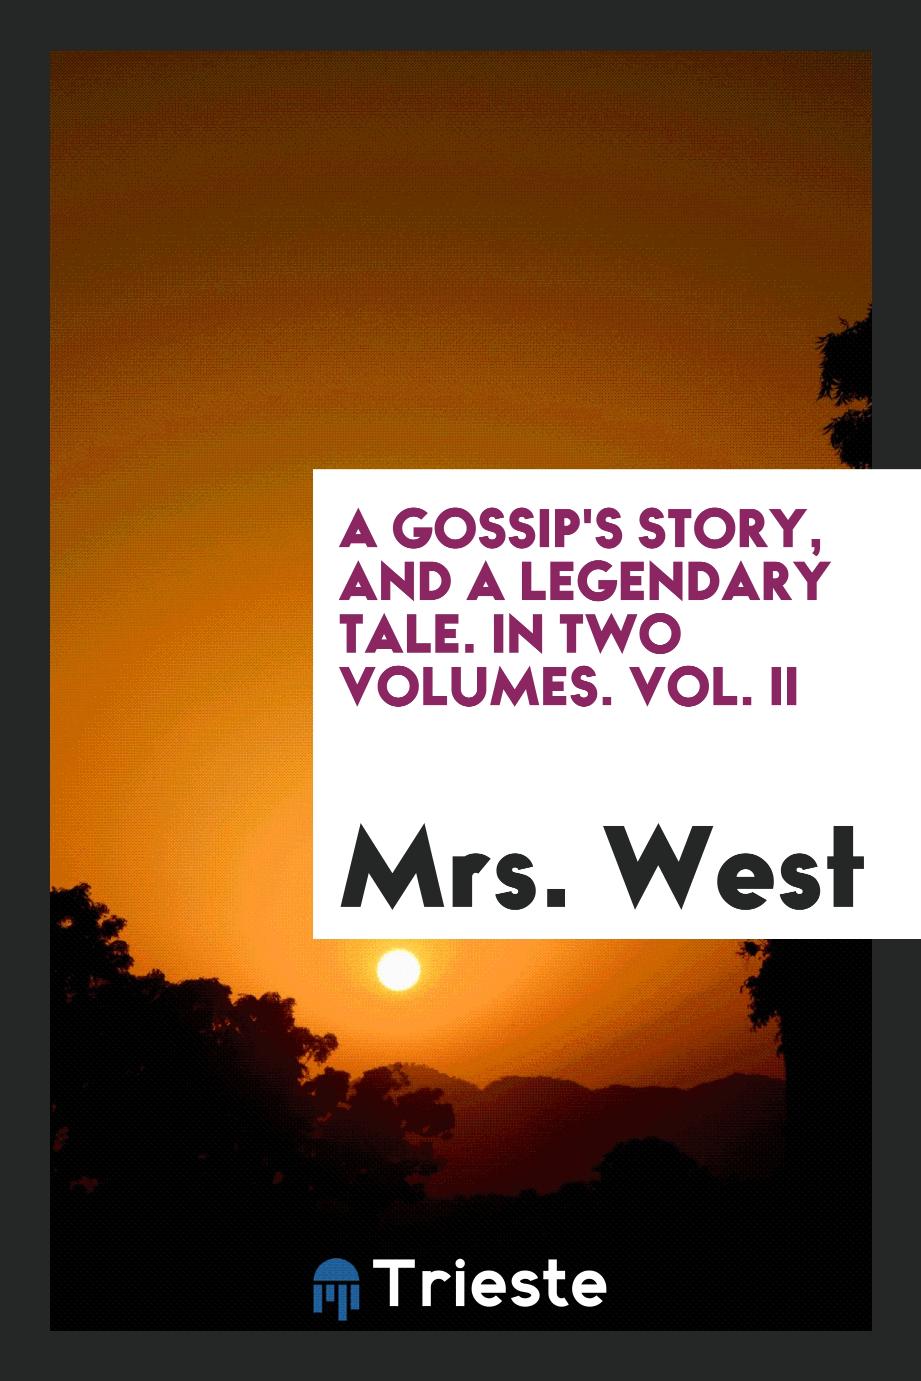 A gossip's story, and a legendary tale. In two volumes. Vol. II